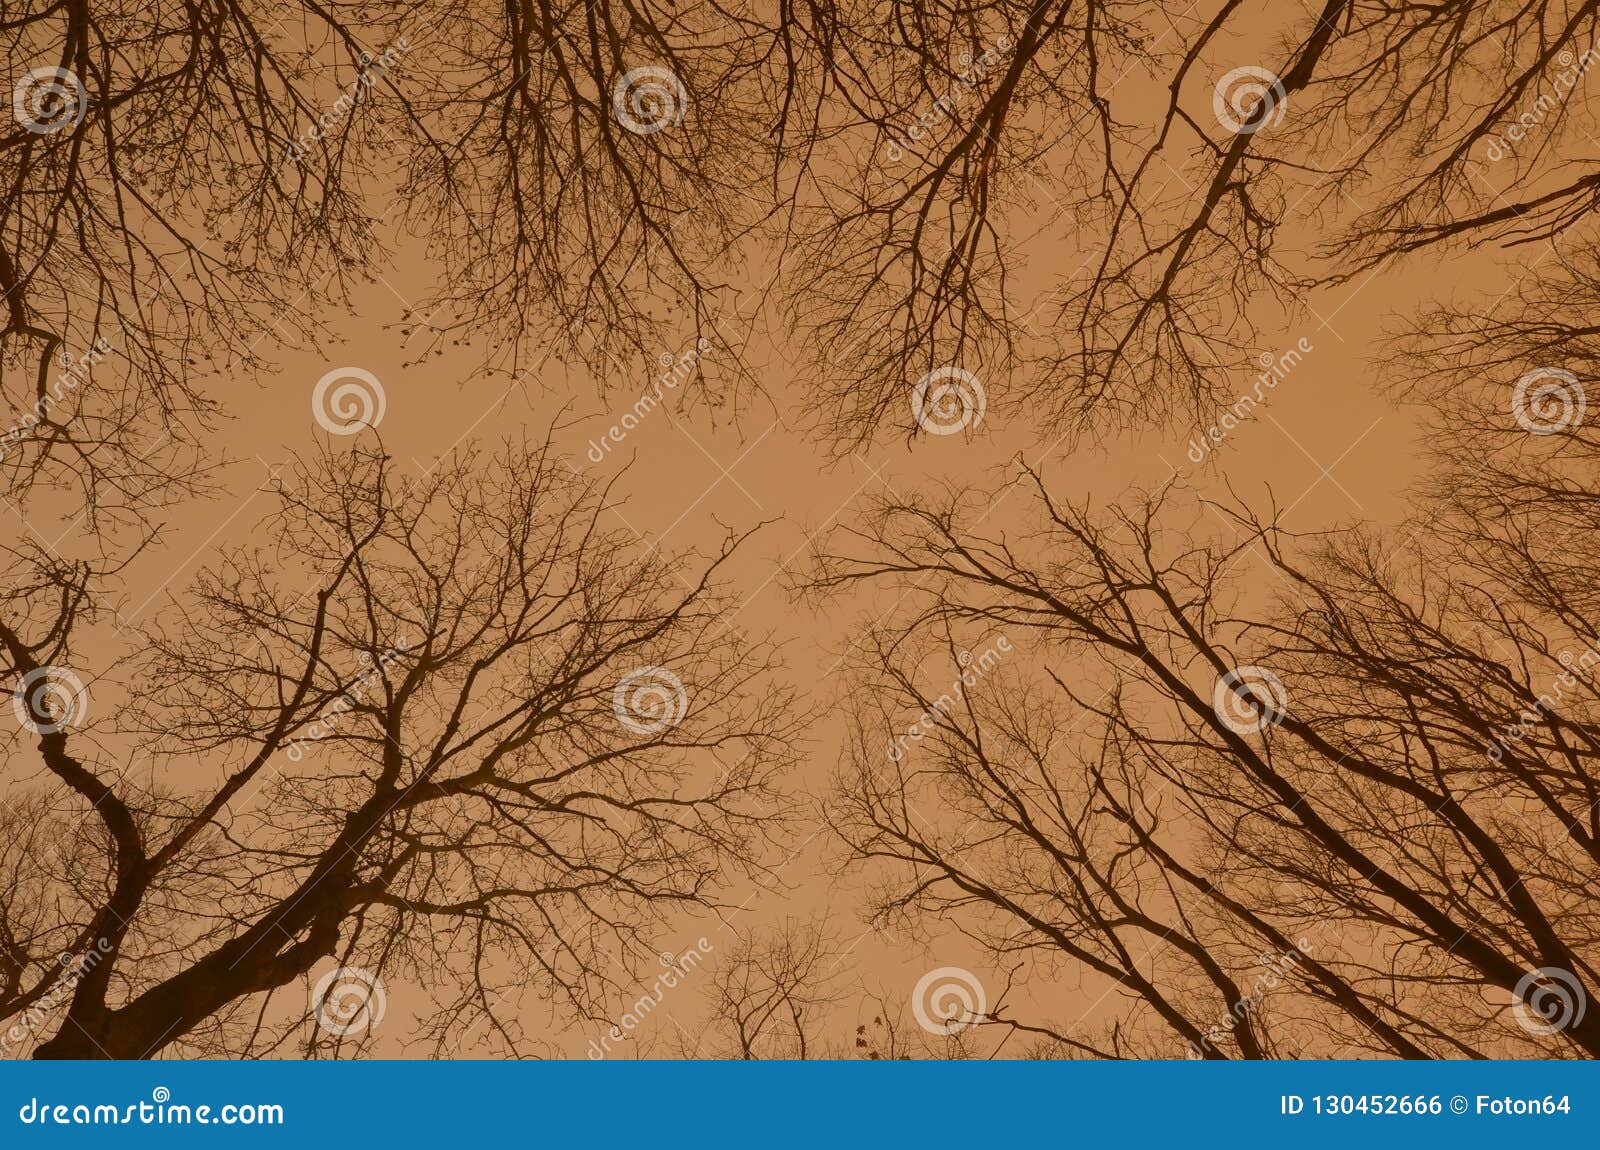 Silhouettes of Bare Trees Against Night Sky Stock Photo - Image of